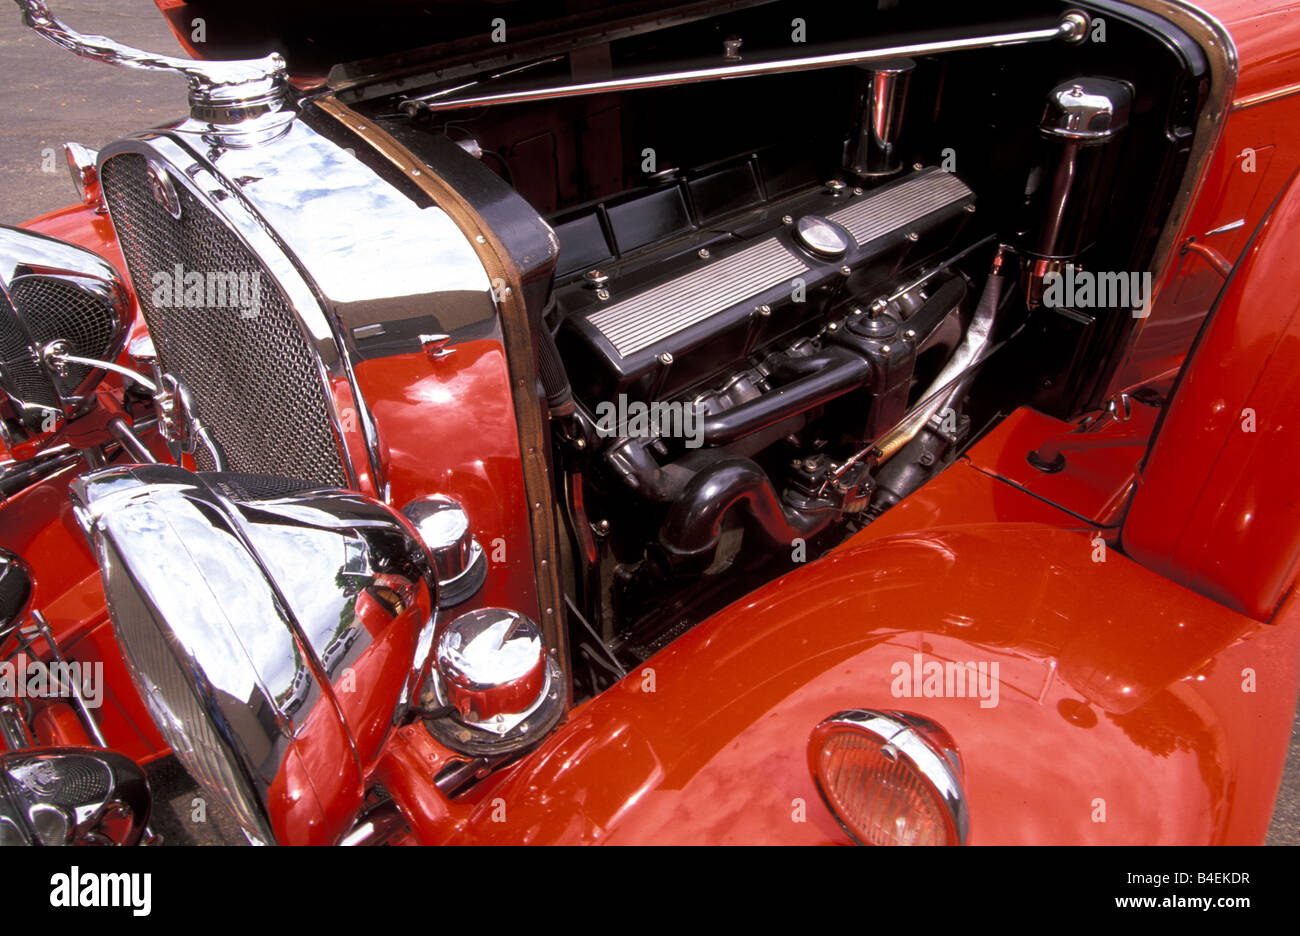 Car, Cadillac V16, vintage car, red, model year 1930-1931, convertible,  1930s, thirties, engine compartment, engine , technics, Stock Photo